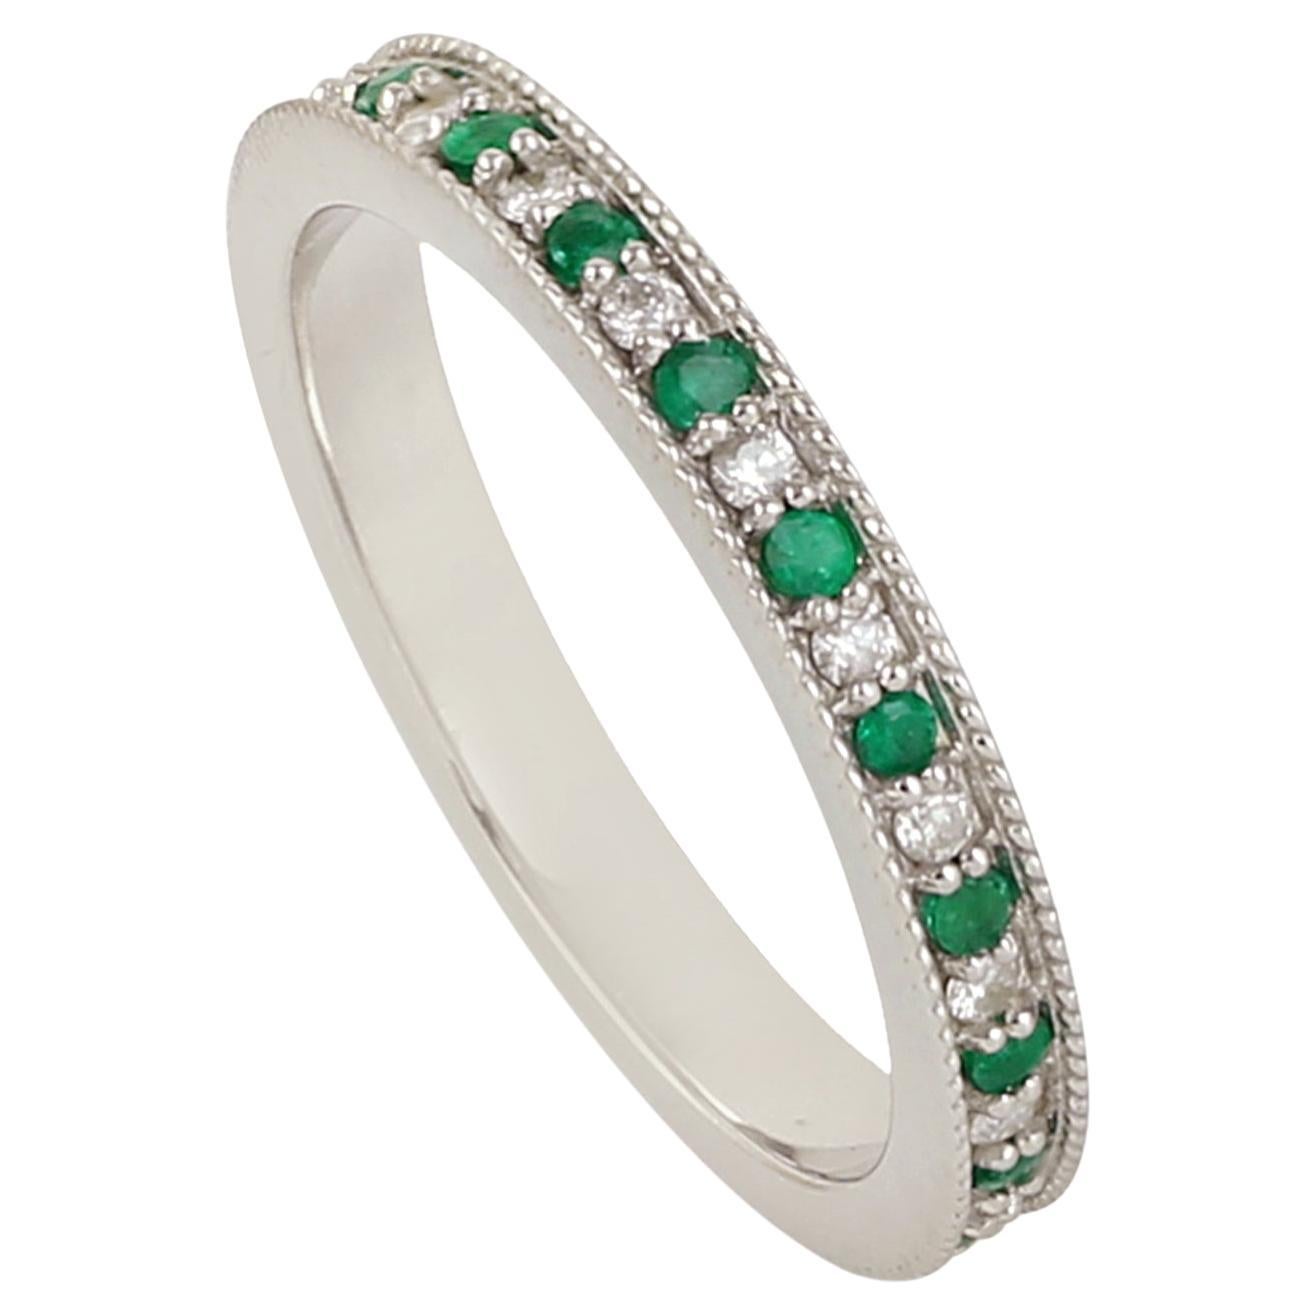 Pave Diamond & Emerald Channel Set Band Ring Made In 14K White Gold